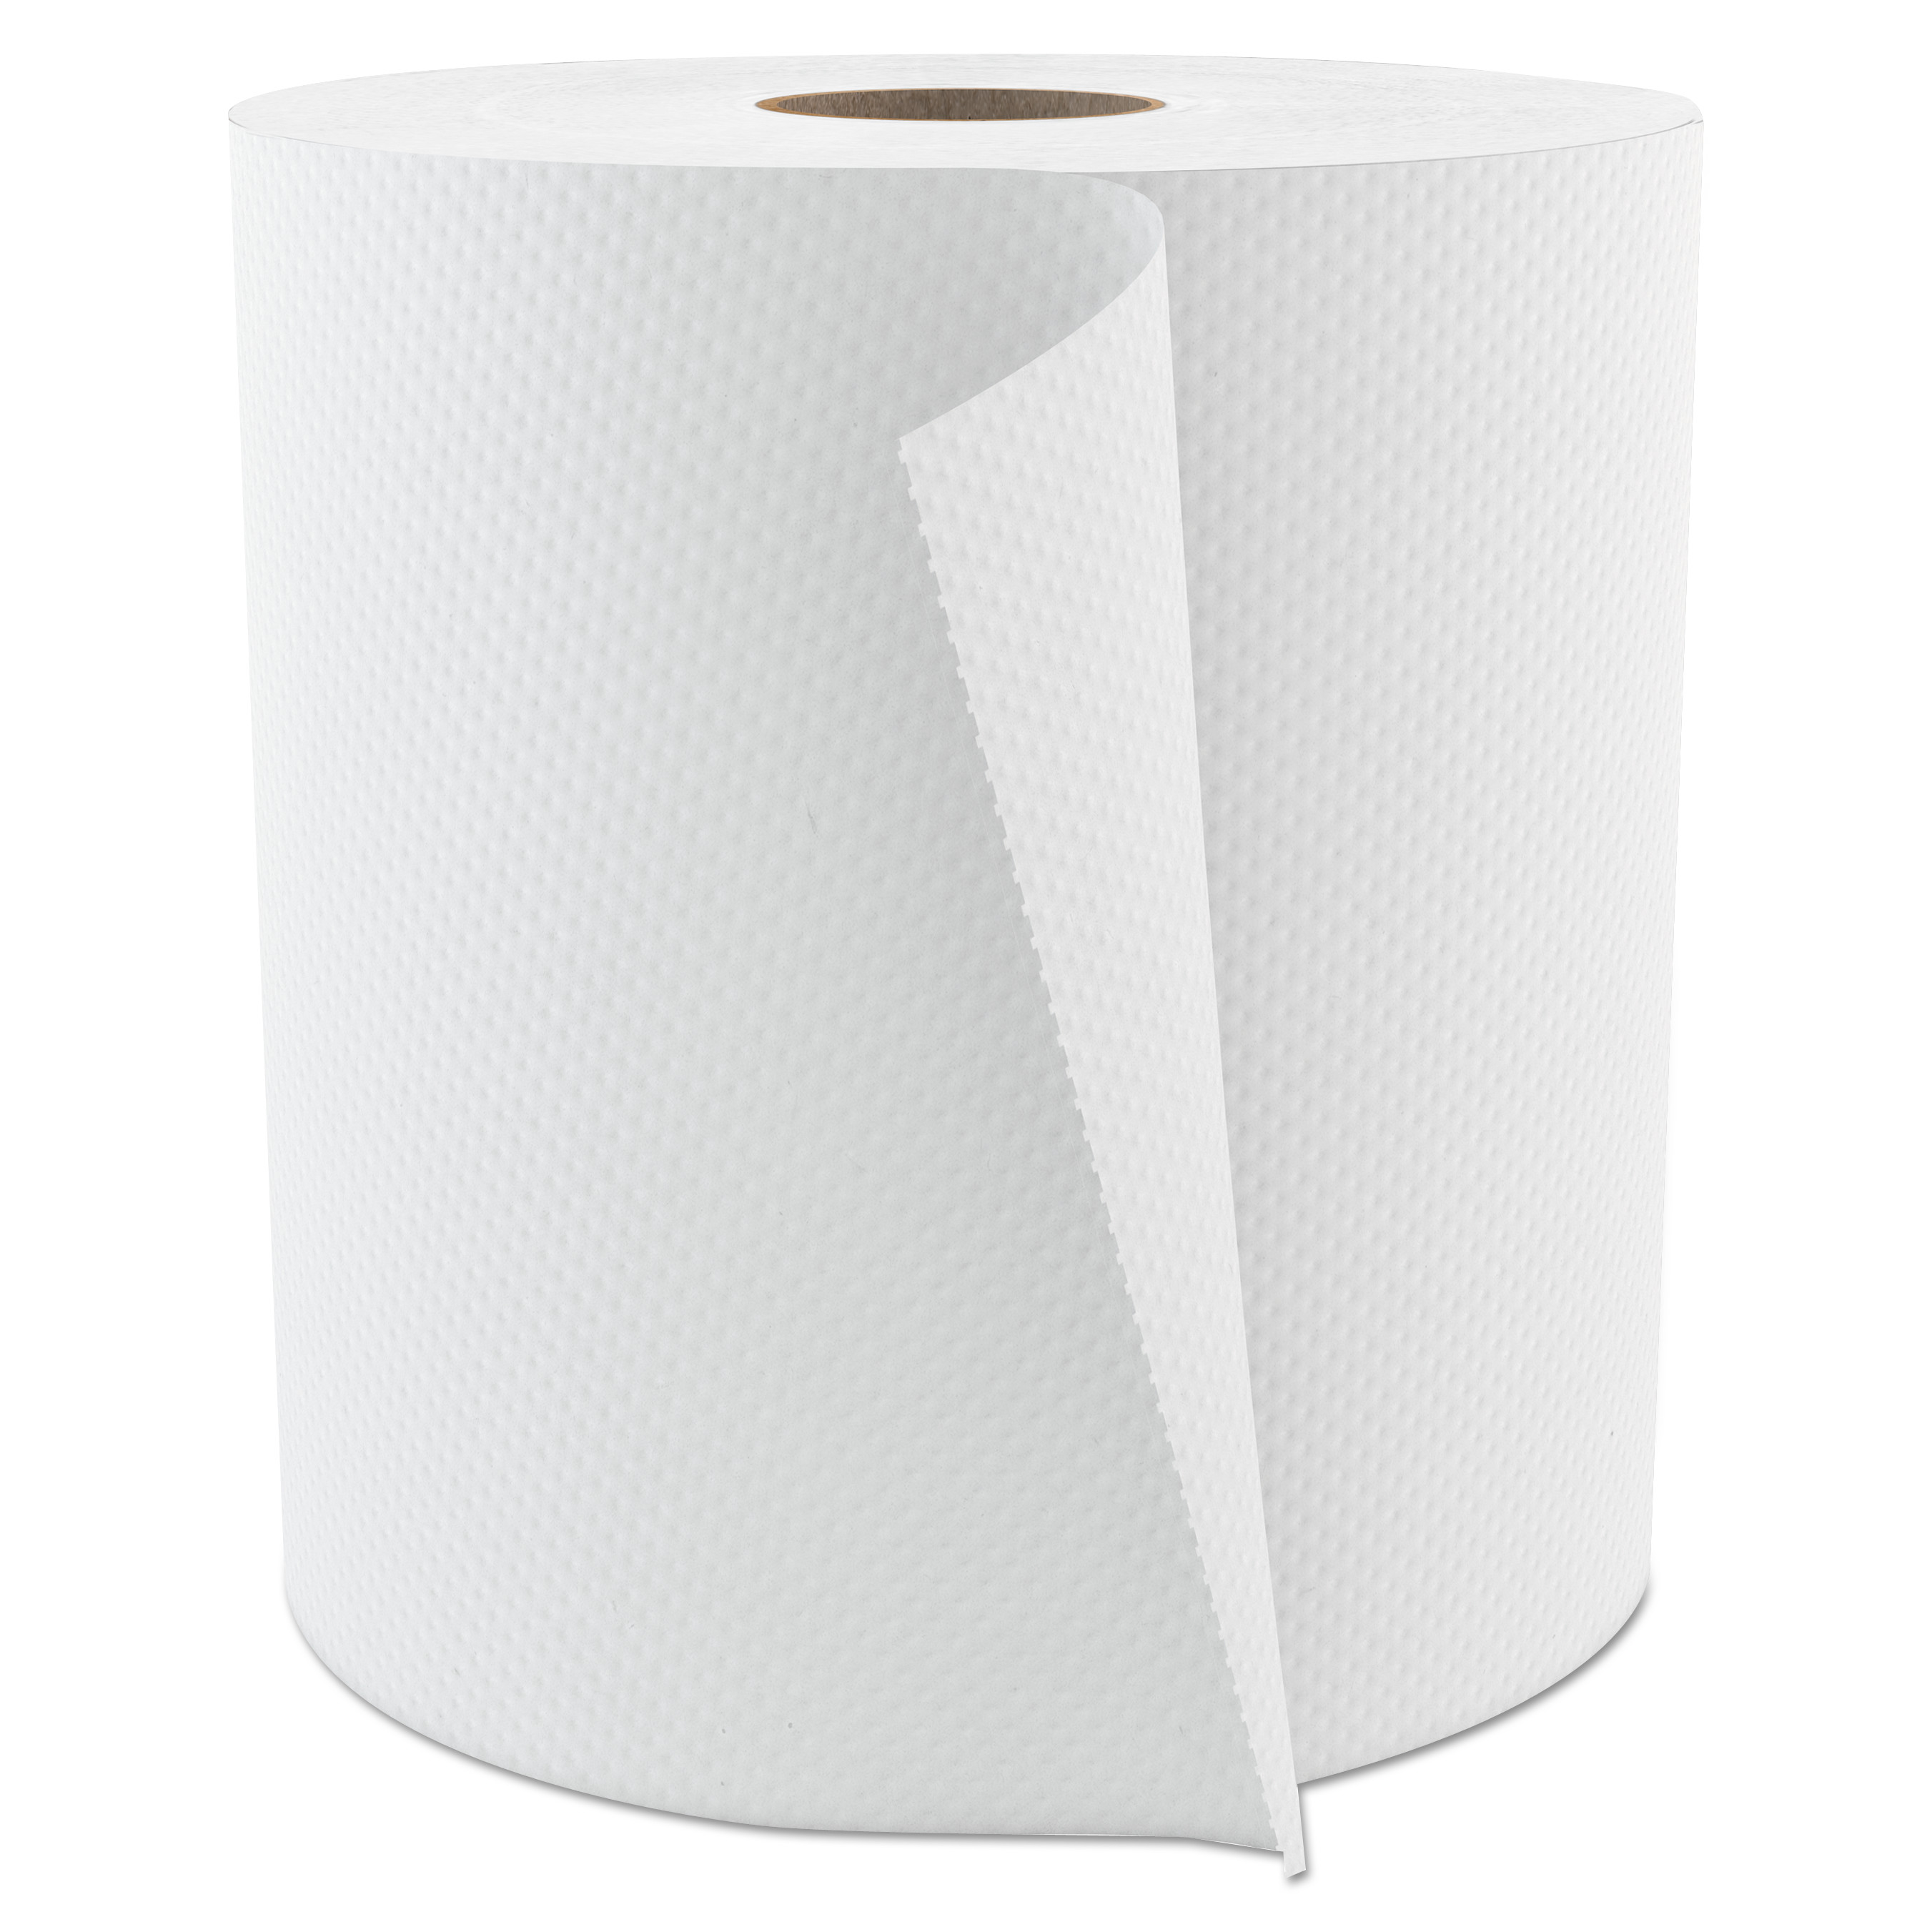  Cascades PRO H084 Select Roll Paper Towels, 1-Ply, 7.875 x 800 ft, White, 6/Carton (CSDH084) 